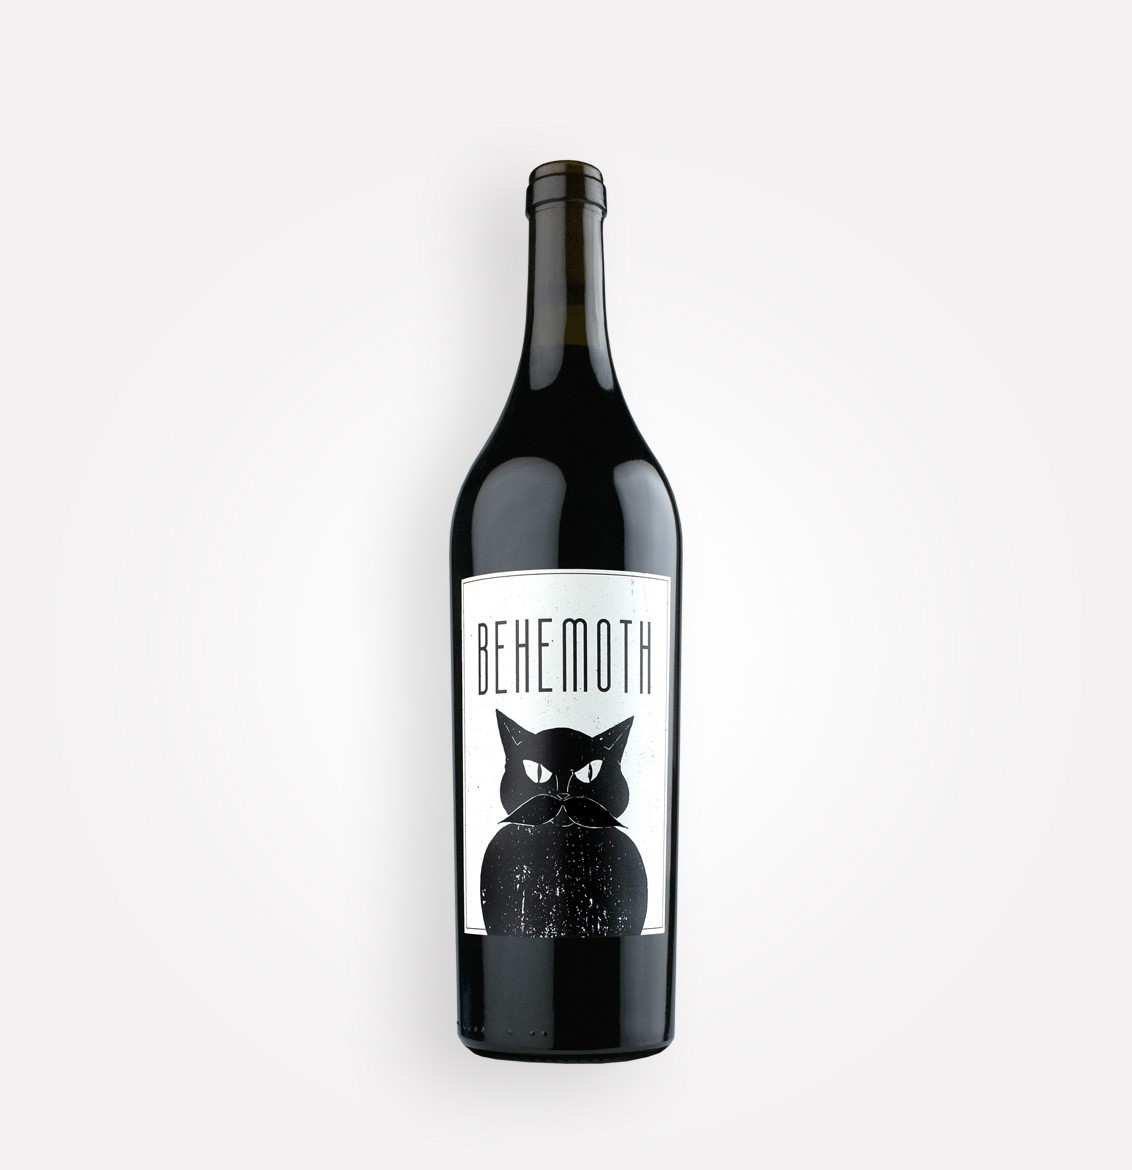 Bottle of Wautoma Springs 2017 The Behemoth Reserve Cabernet Sauvignon wine from Washington's Columbia Valley